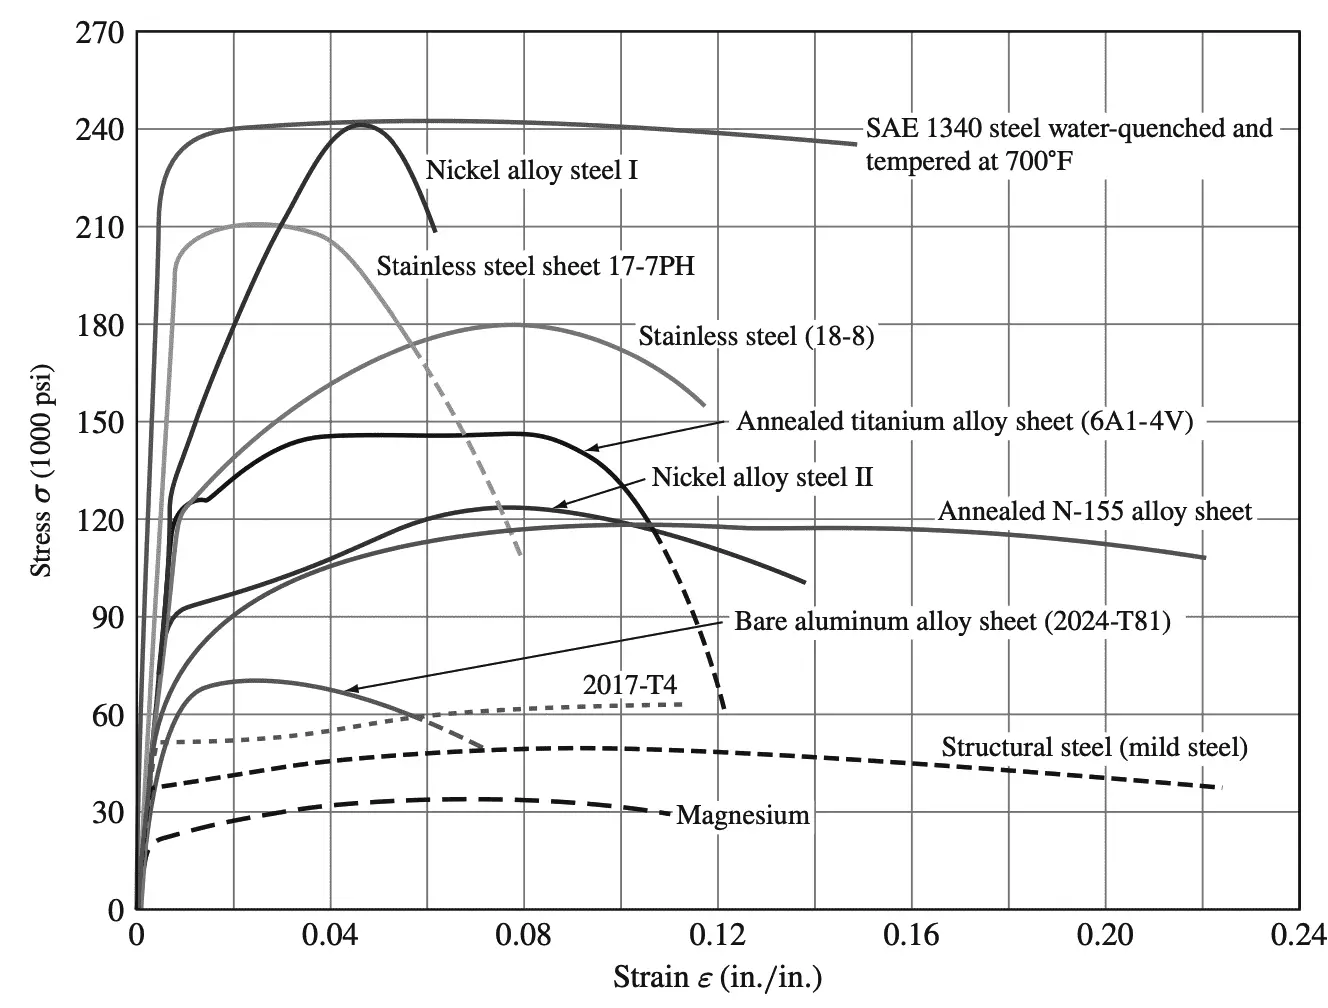 Engineering Stress Strain Curves for commonly used metals and alloys.